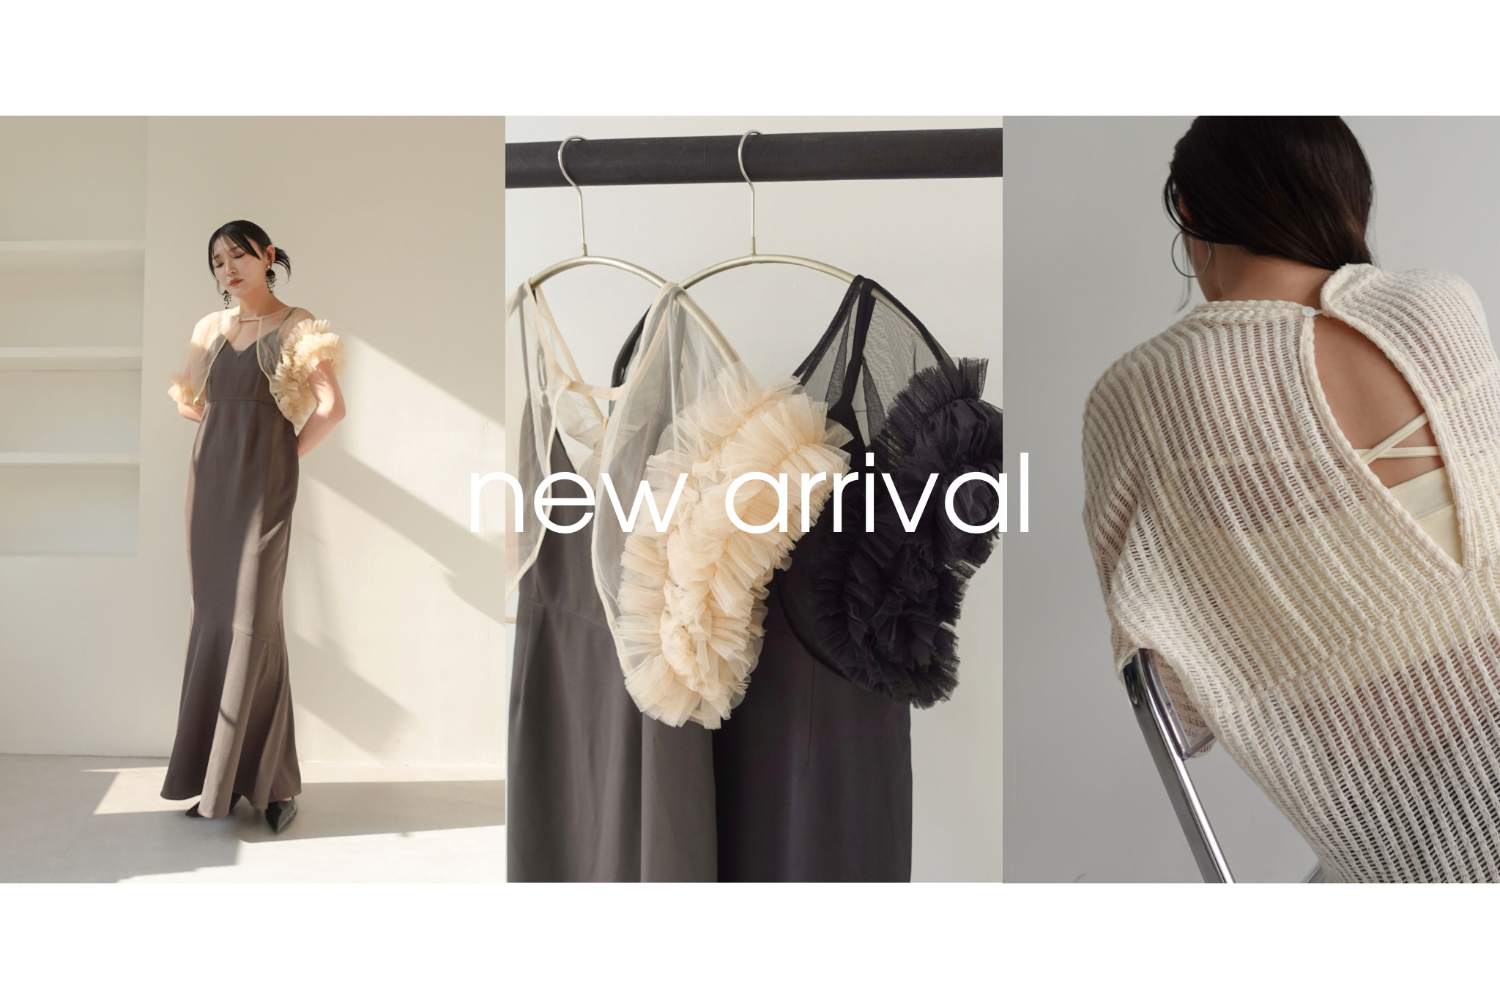 3/15 21:00- new arrival.